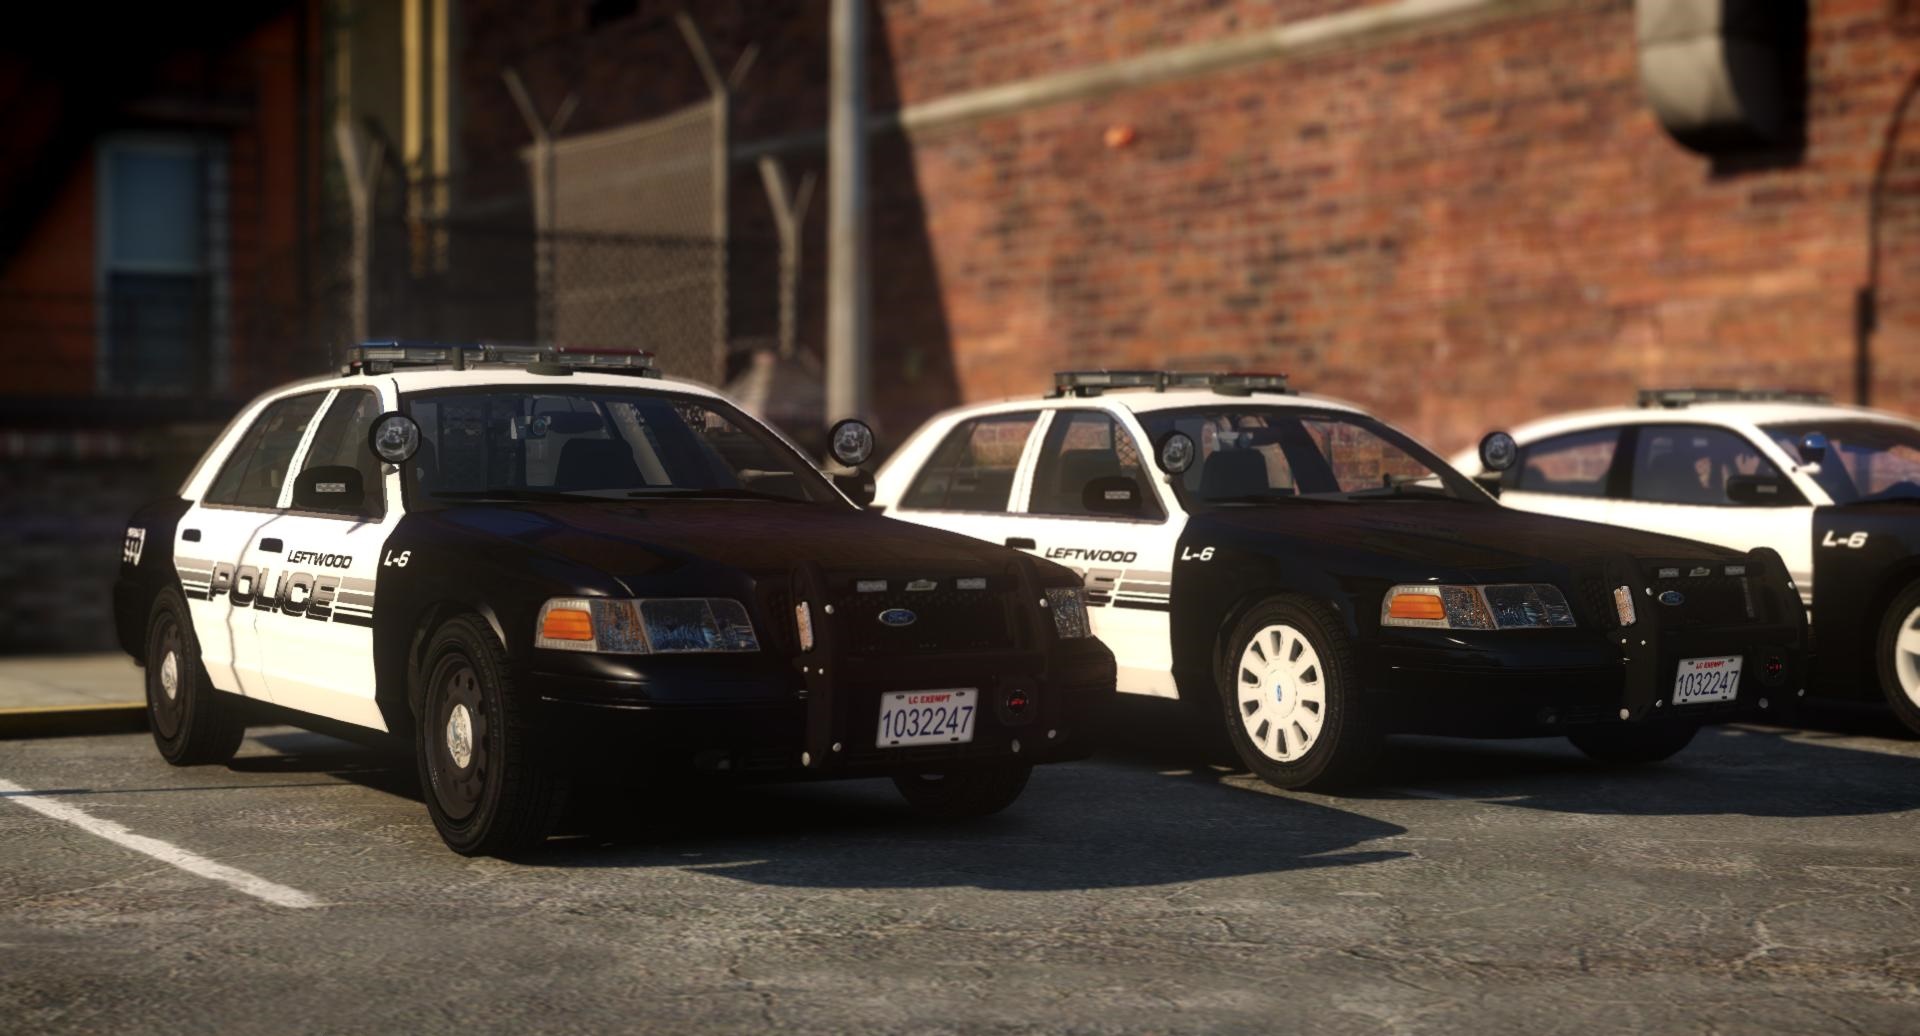 Gta 4 police car pack nypd